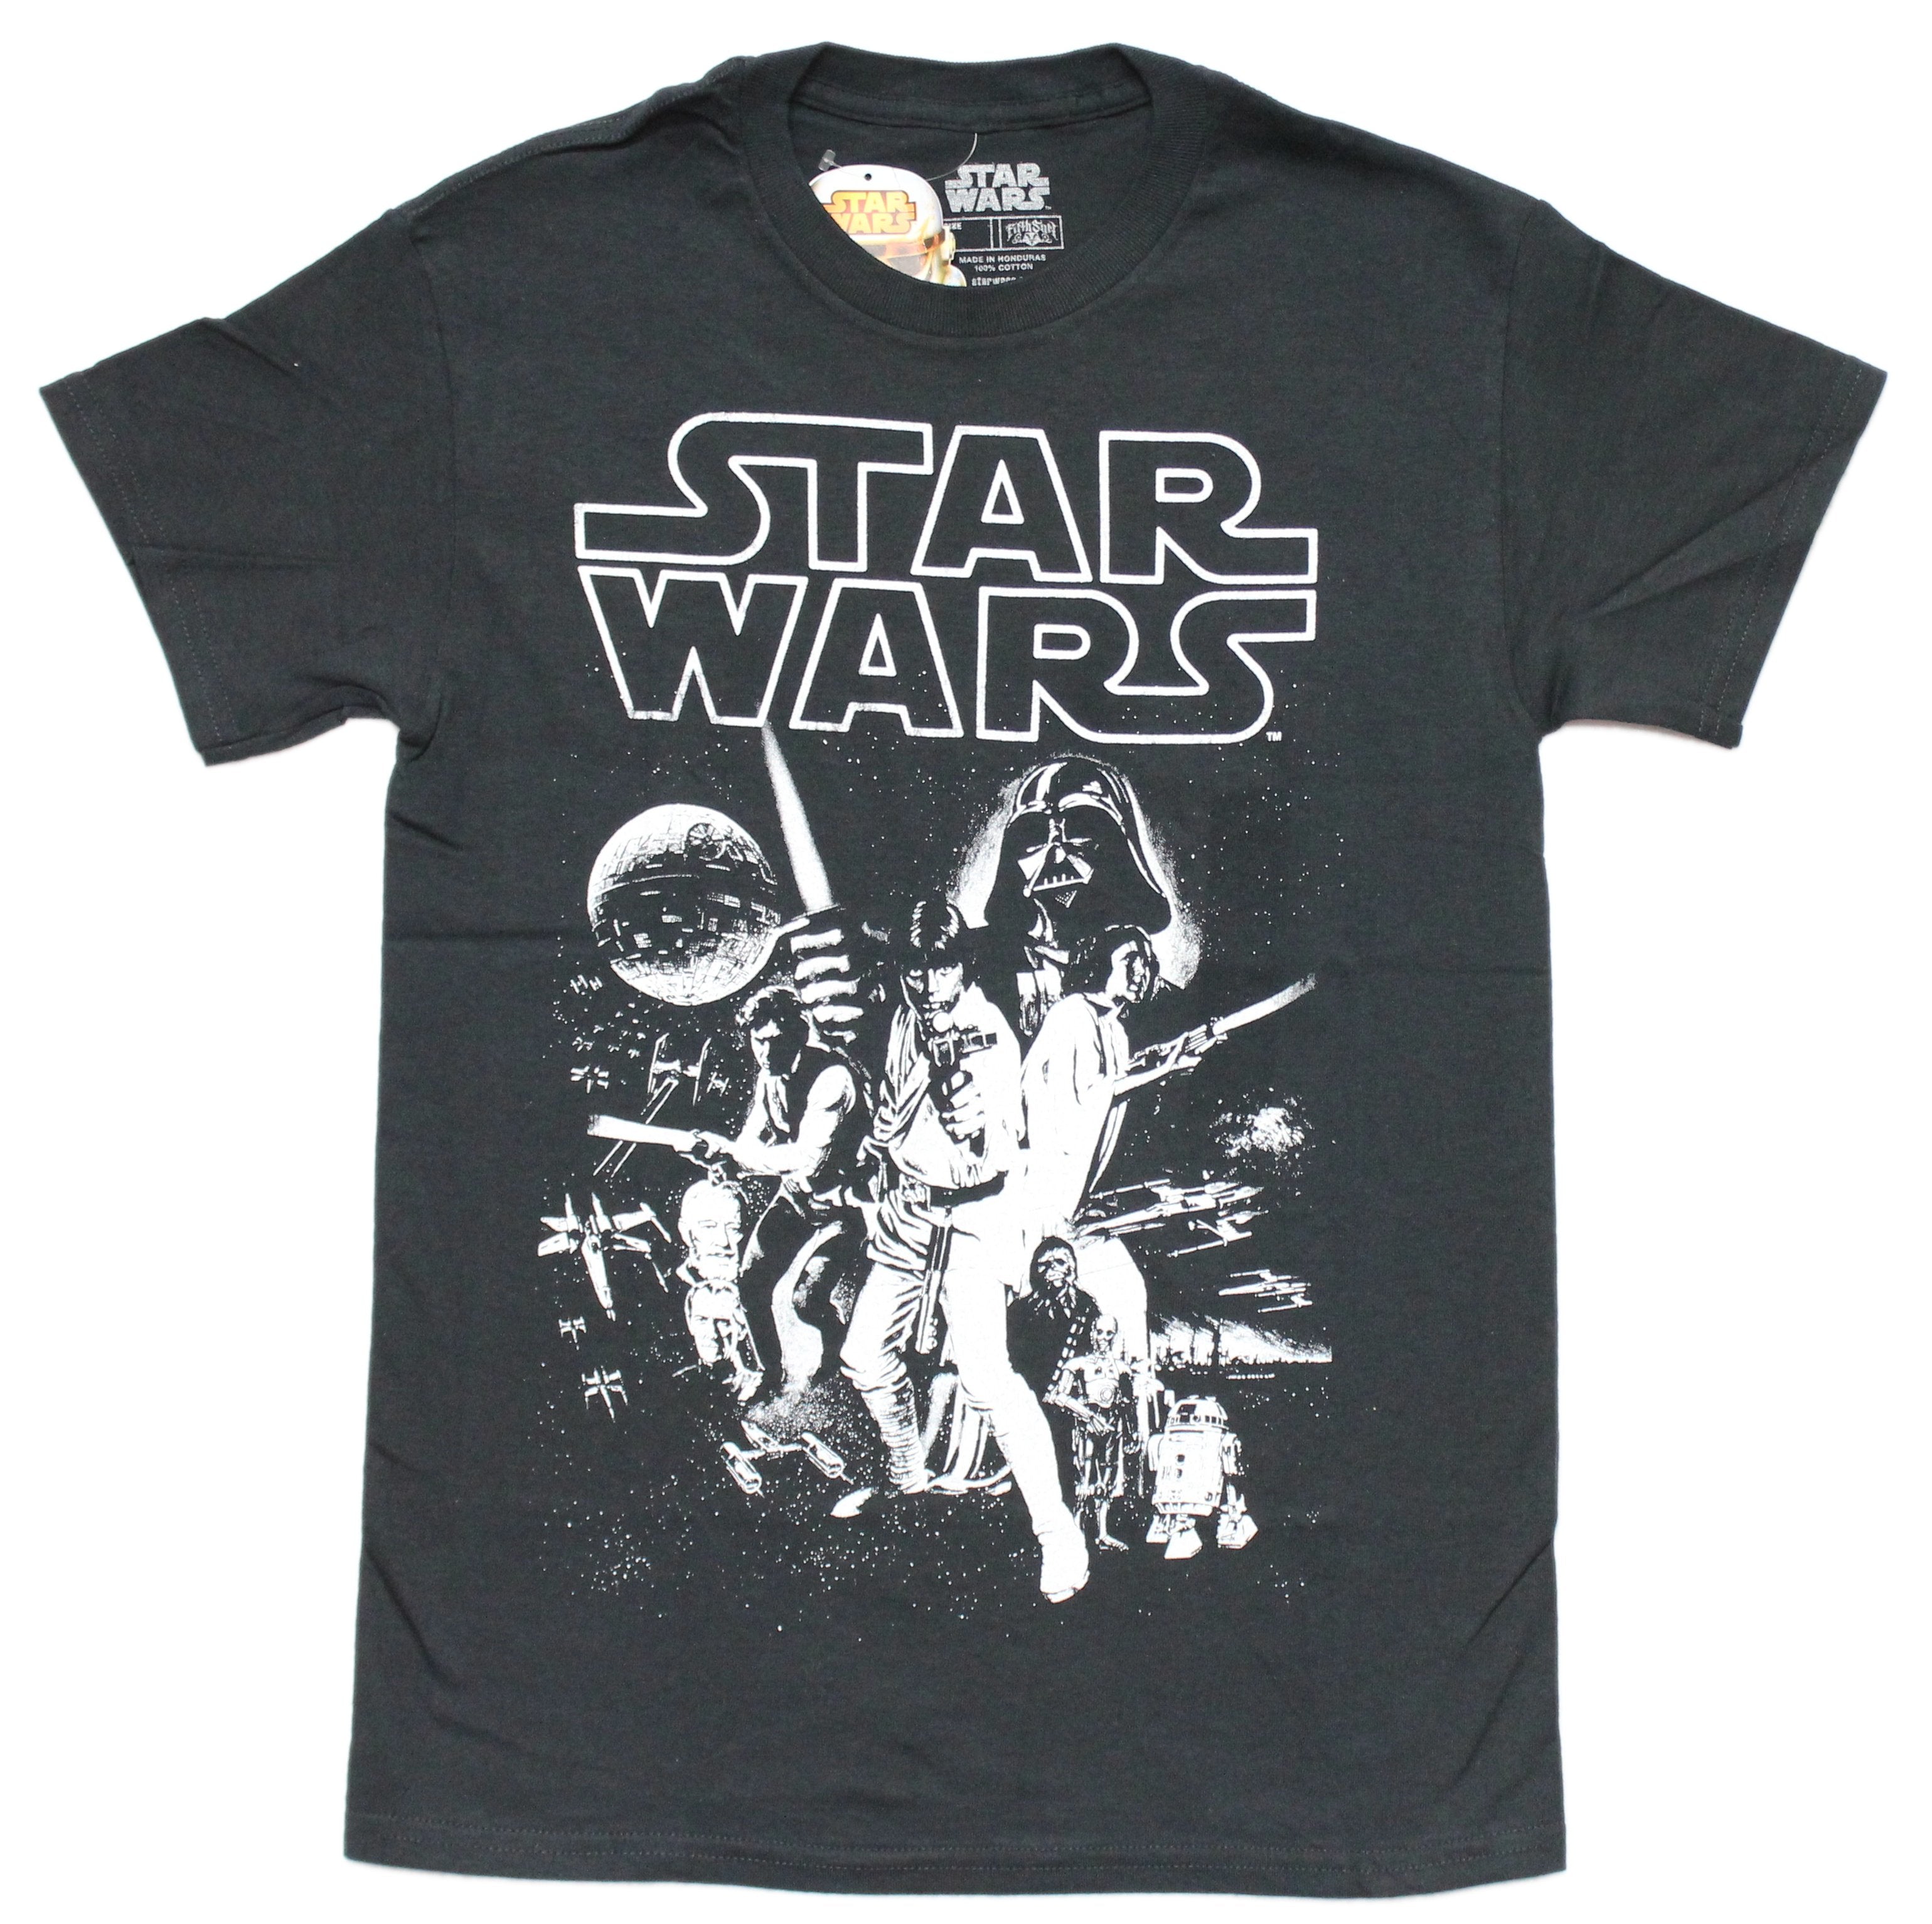 Star Wars Mens T-Shirt - Monochromatic Classic A New Hope Poster